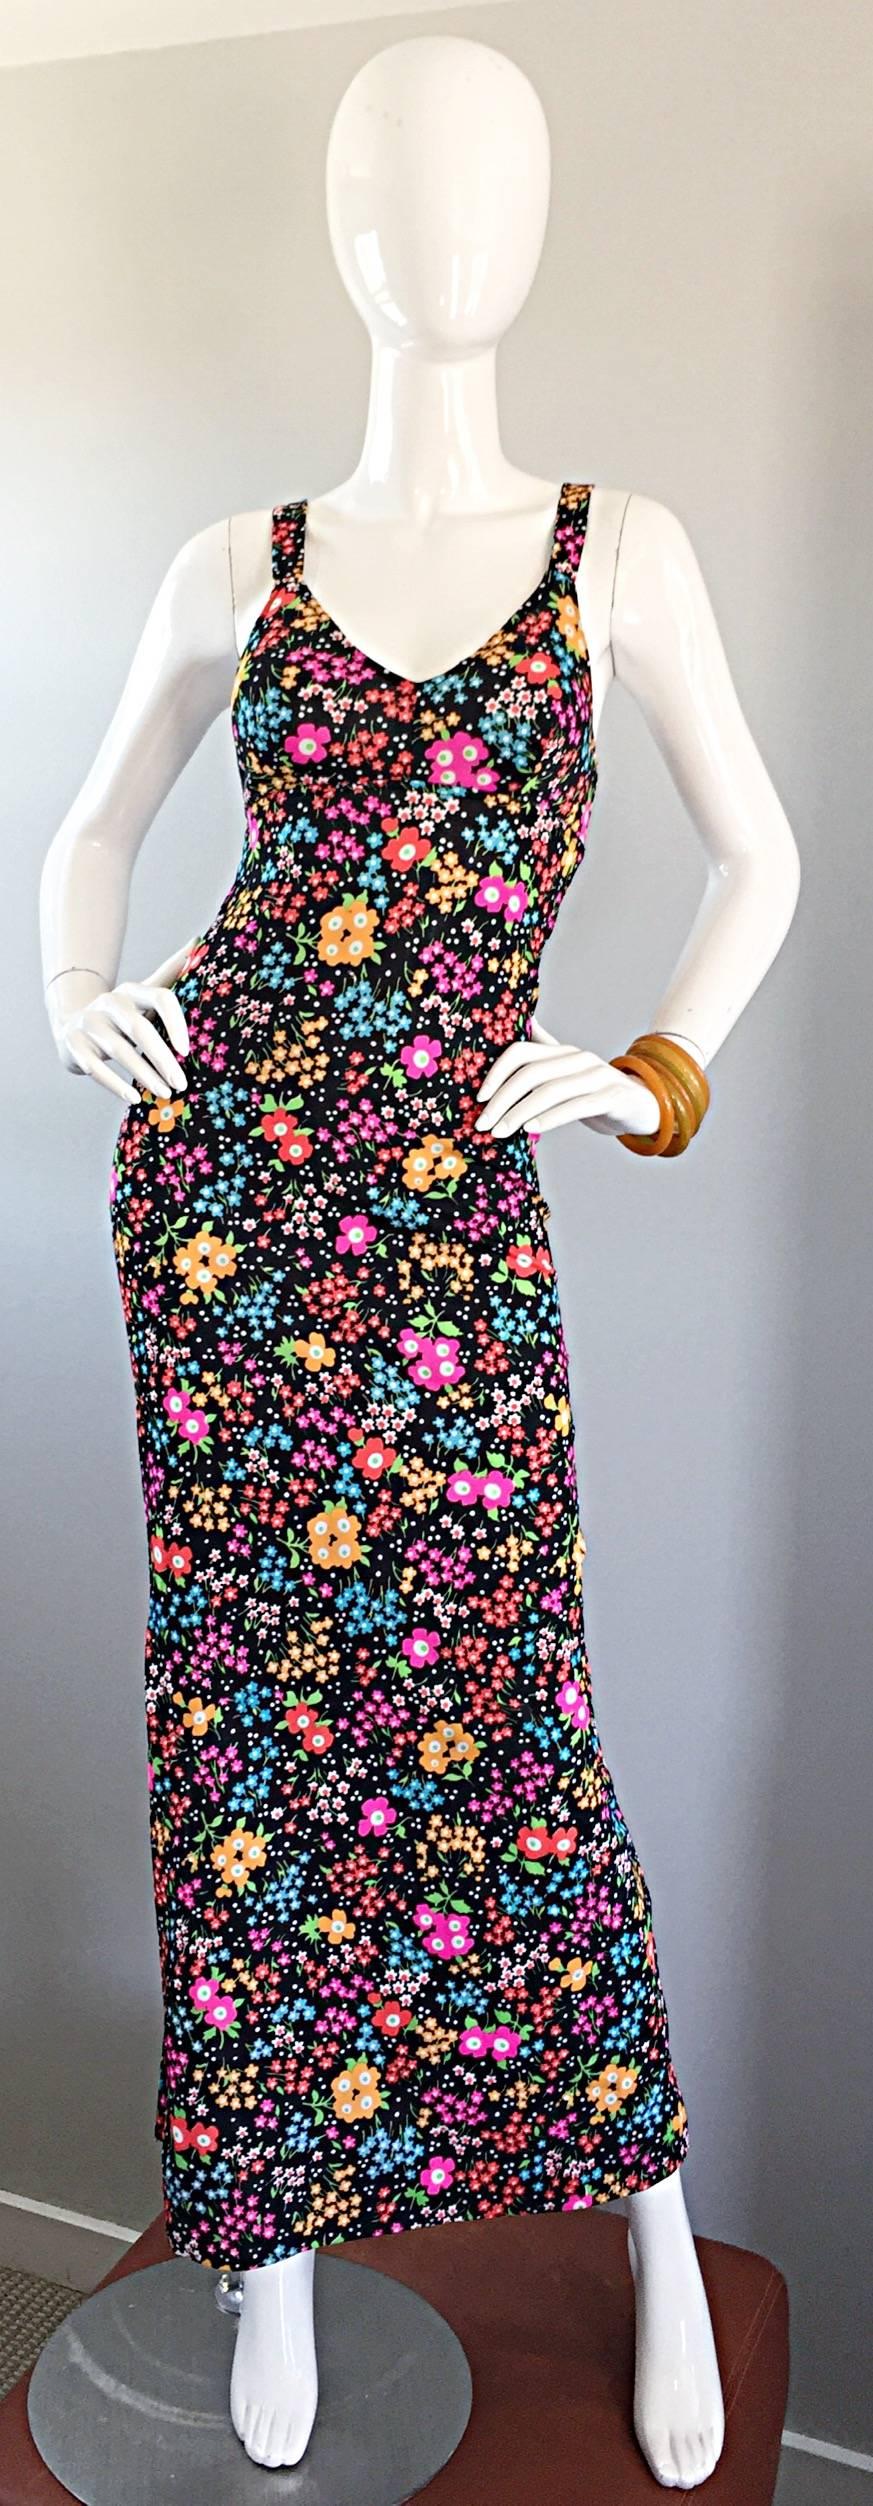 Insanely stylish JACK HARTLEY (of MIAMI) vintage 1970s fitted  jersey maxi dress! Features practically every color of the rainbow in a chic minimal floral print. Multiple back straps, with white plastic lucite center piece. Flattering v-cut bodice